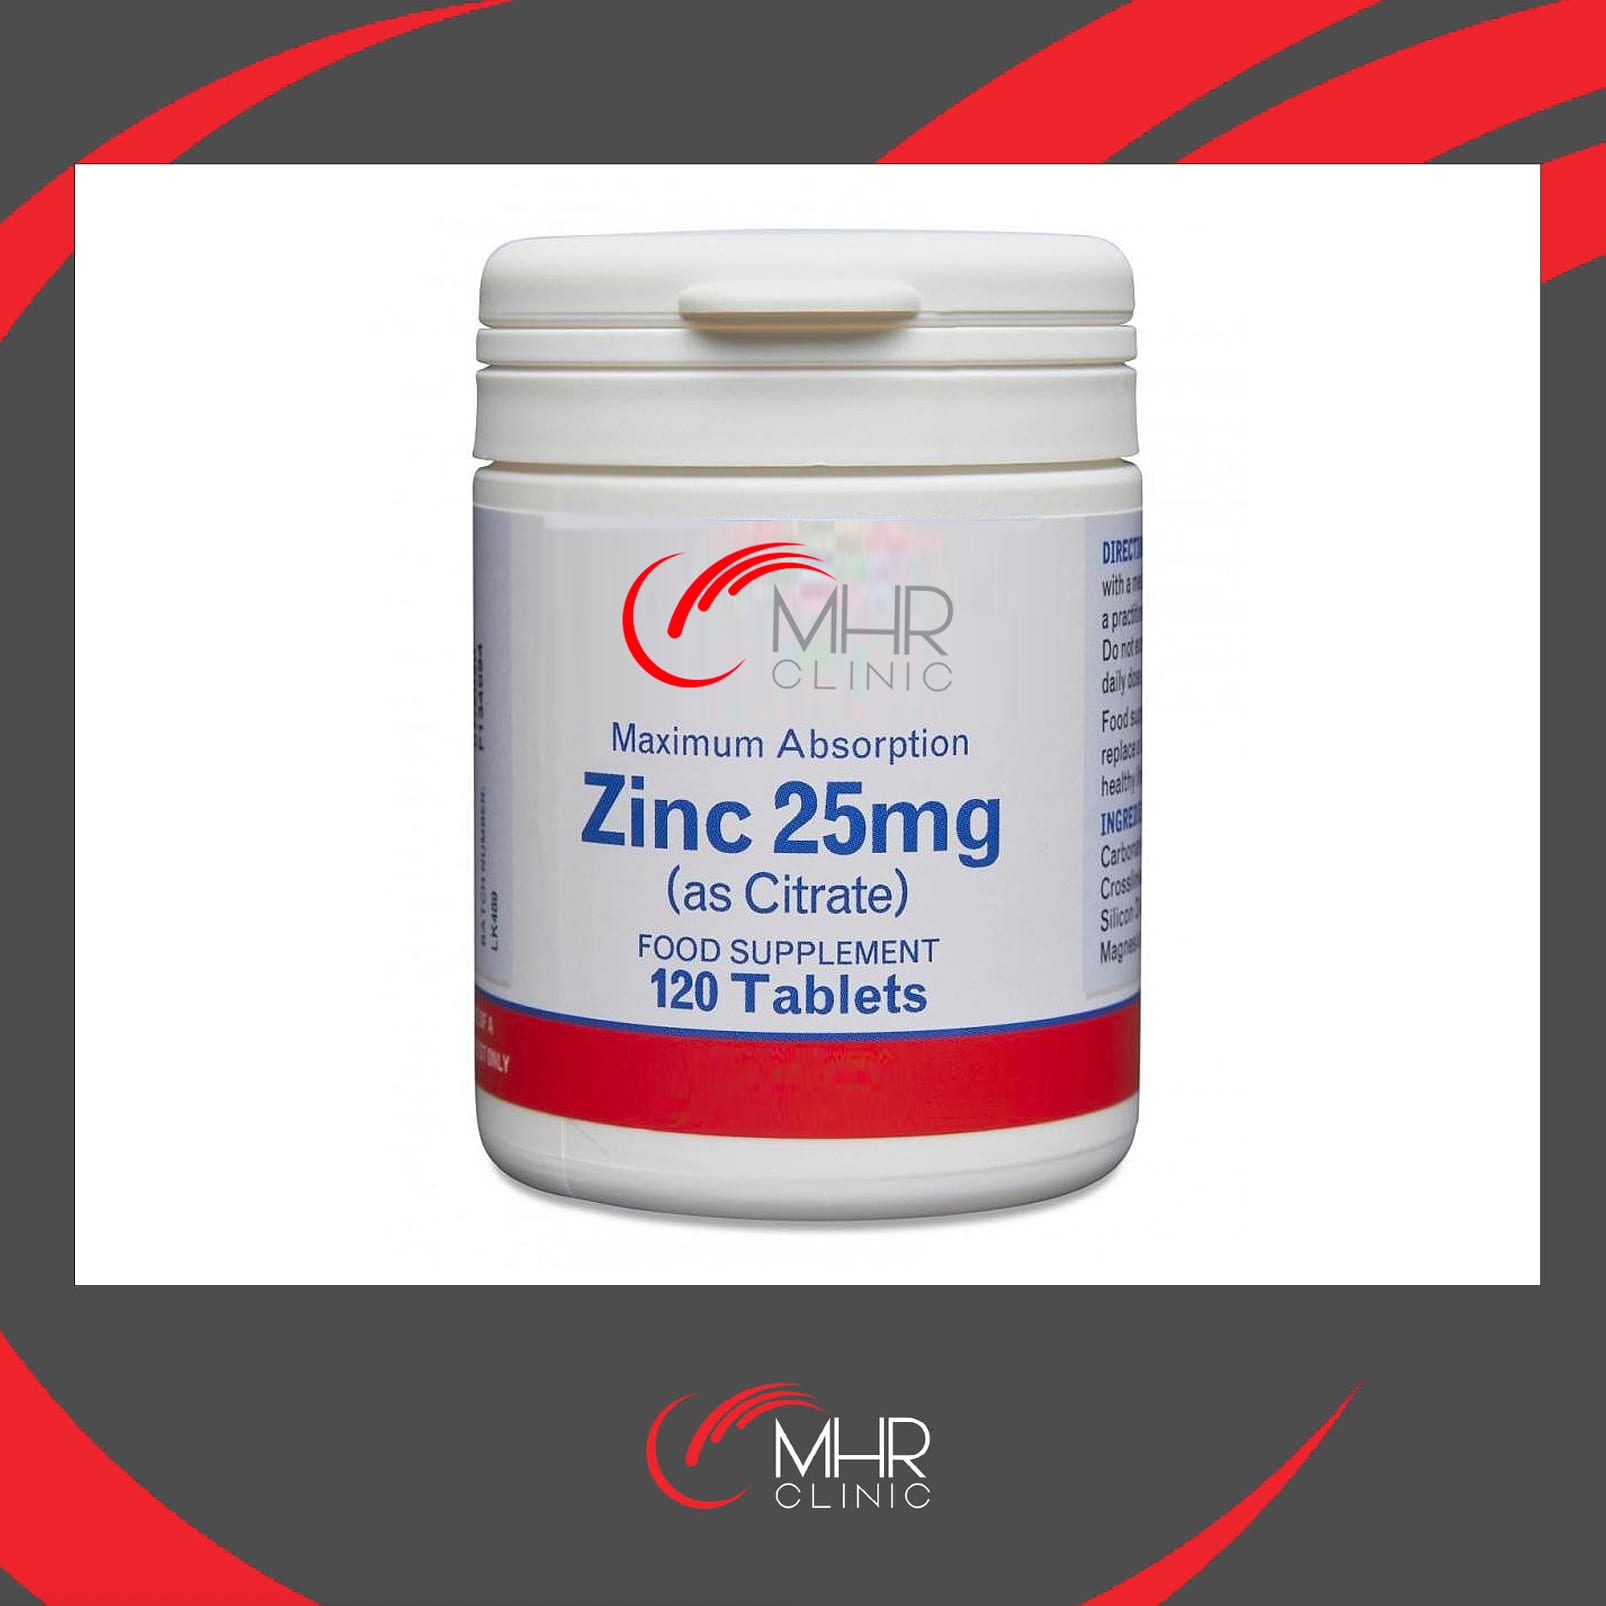 Zinc Deficiency May Cause Hair Loss and Lack of Attention Know More   News18